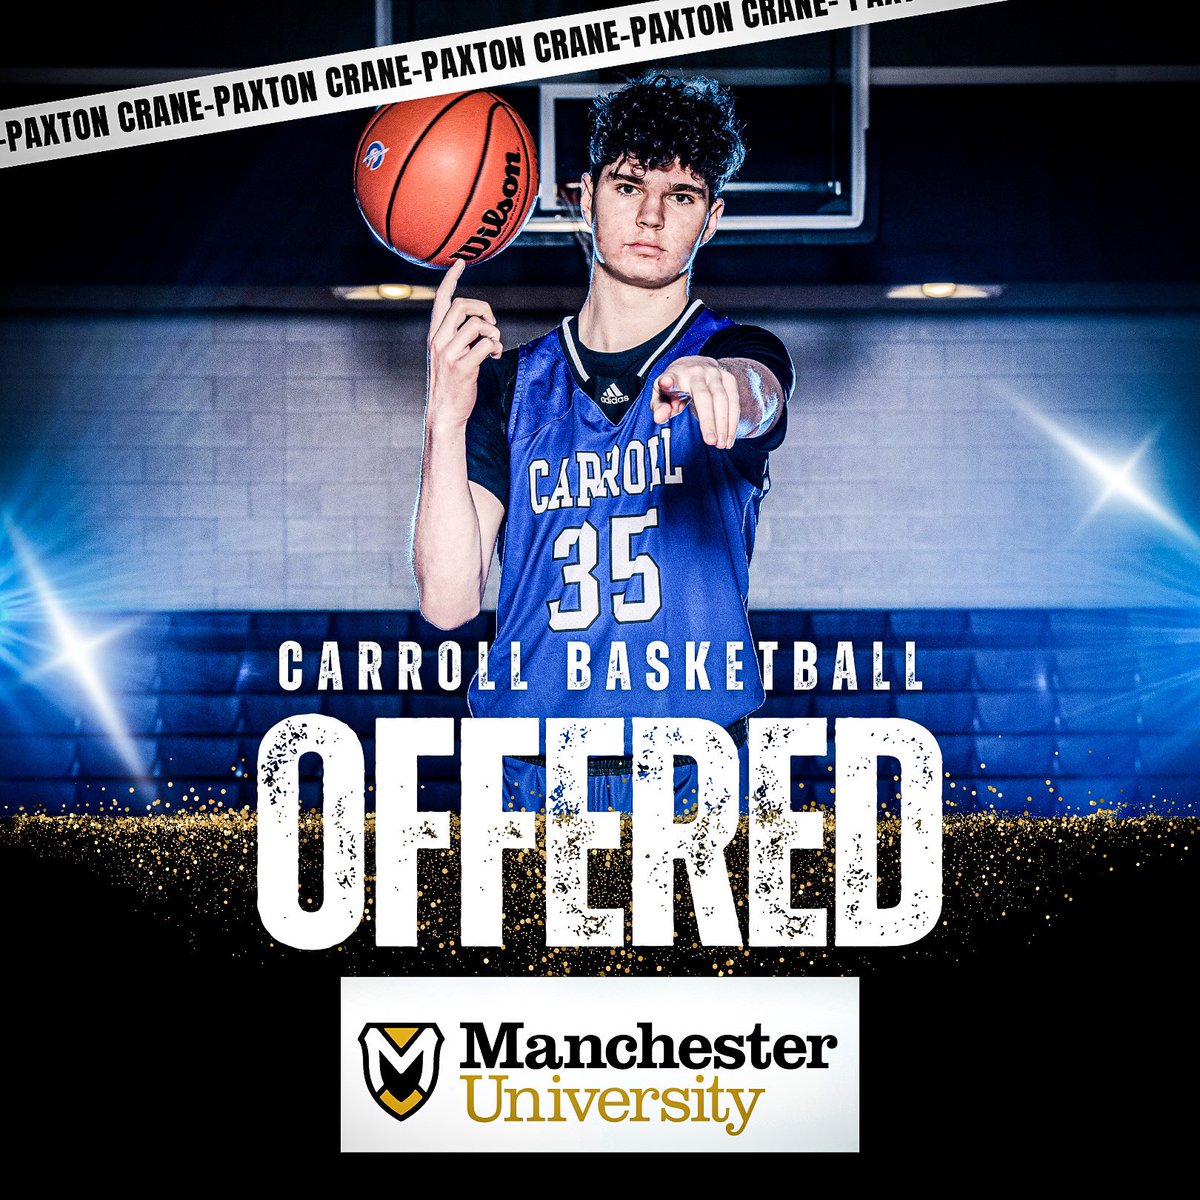 Congratulations to @PaxtonCrane_ on his offer from Manchester University!